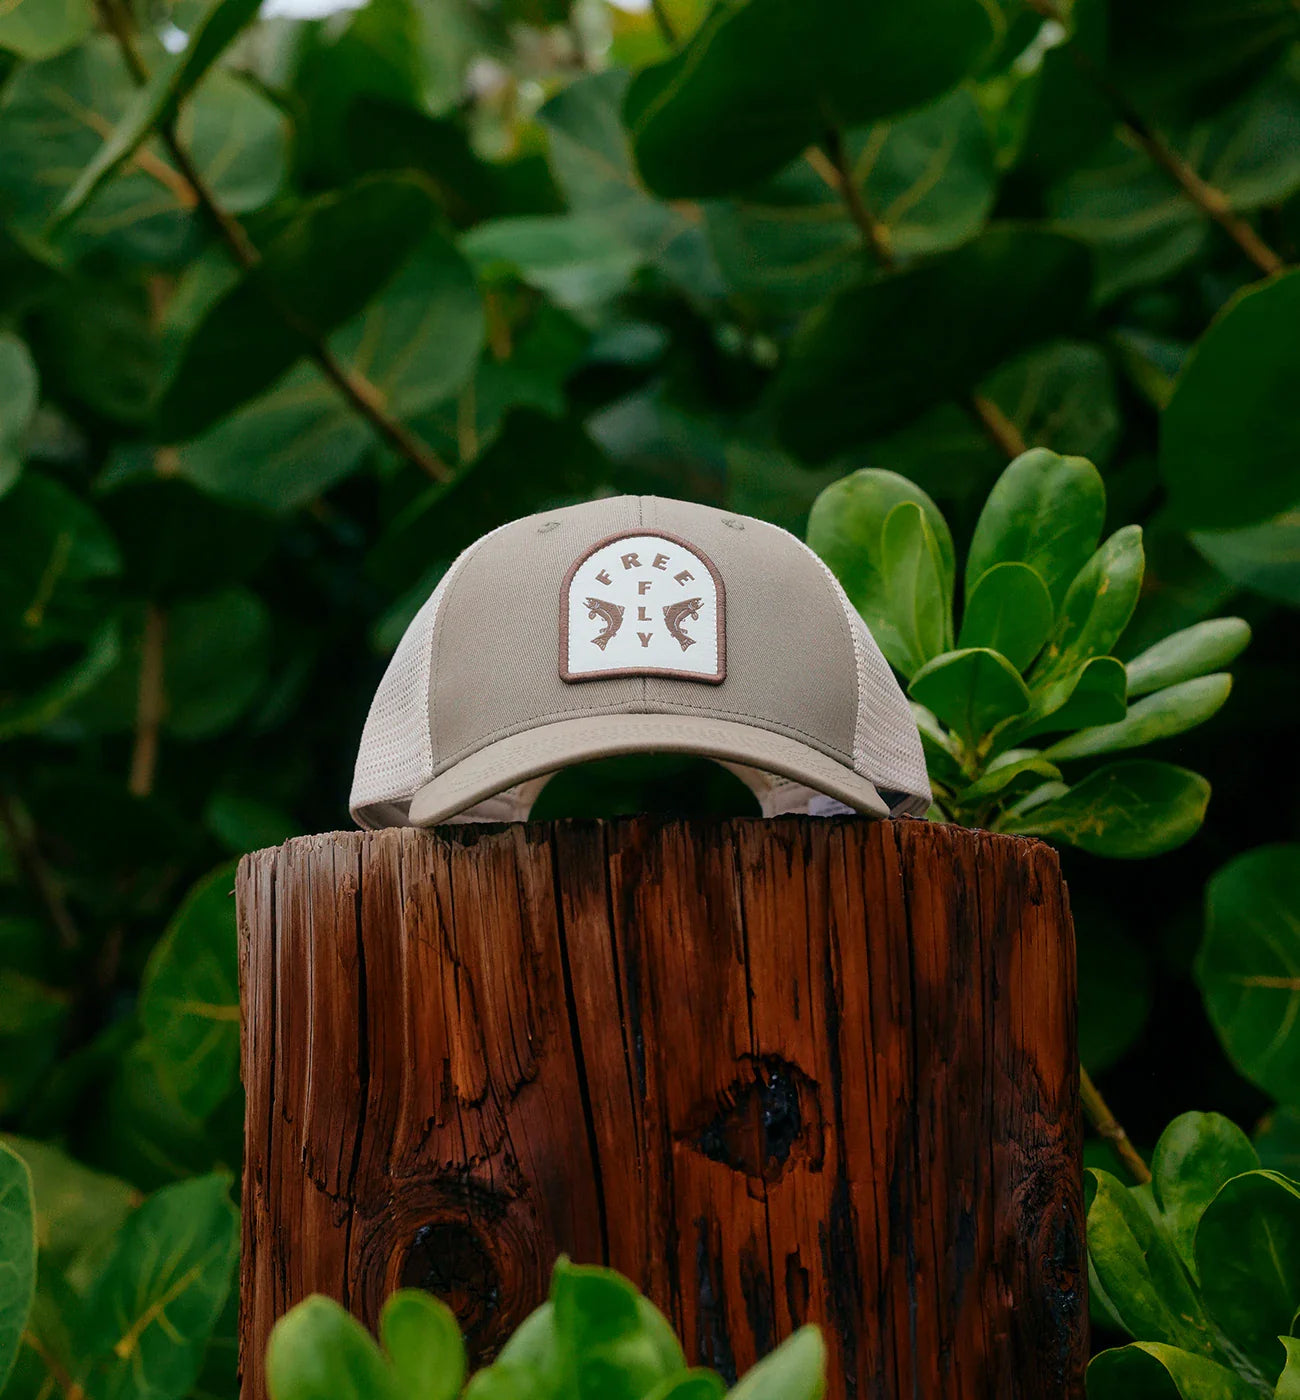 Free Fly Double Up Trucker Hat | Capers Green